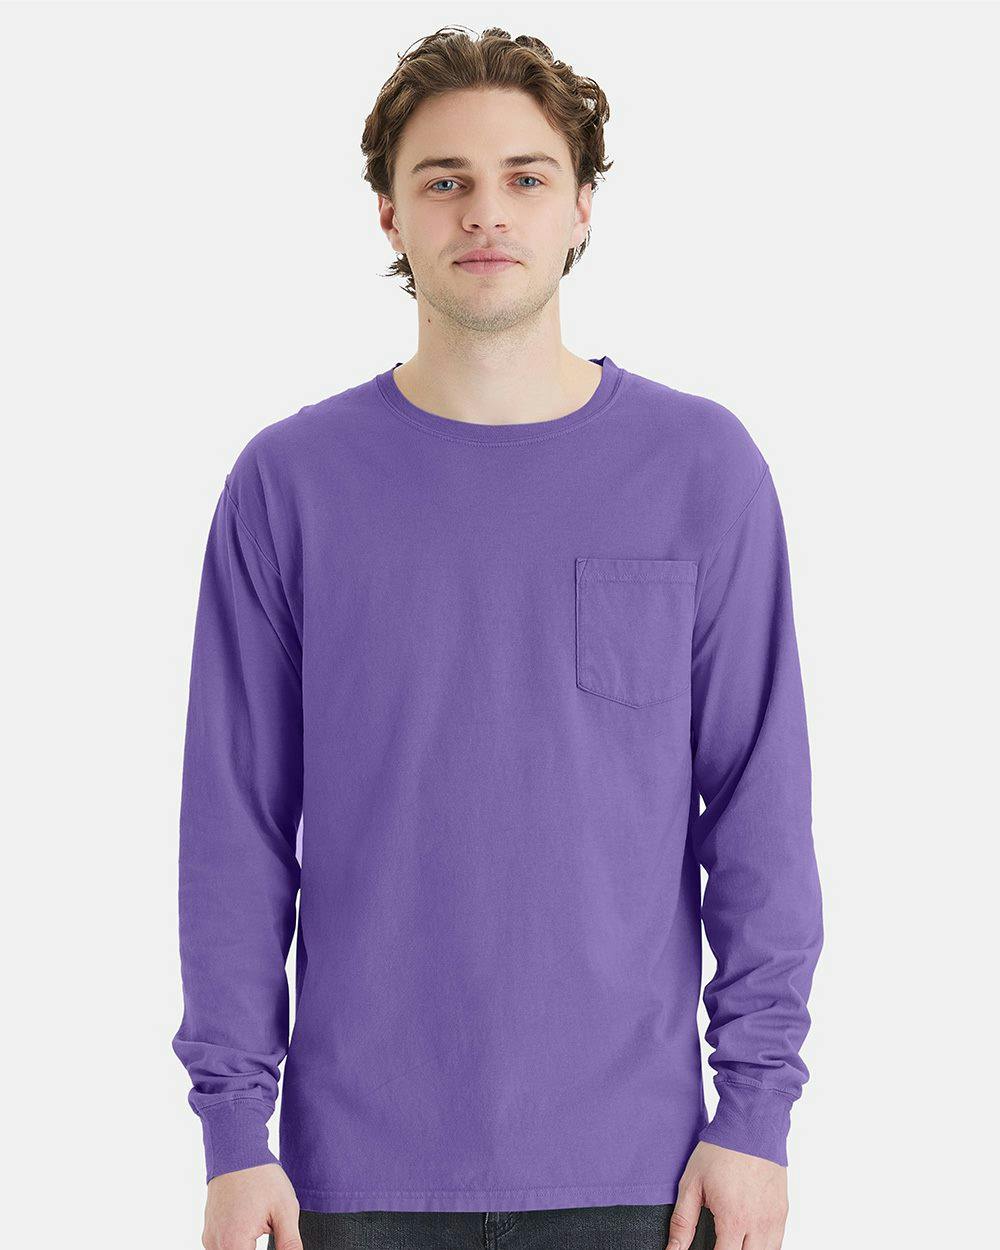 Image for Garment-Dyed Long Sleeve T-Shirt With a Pocket - GDH250